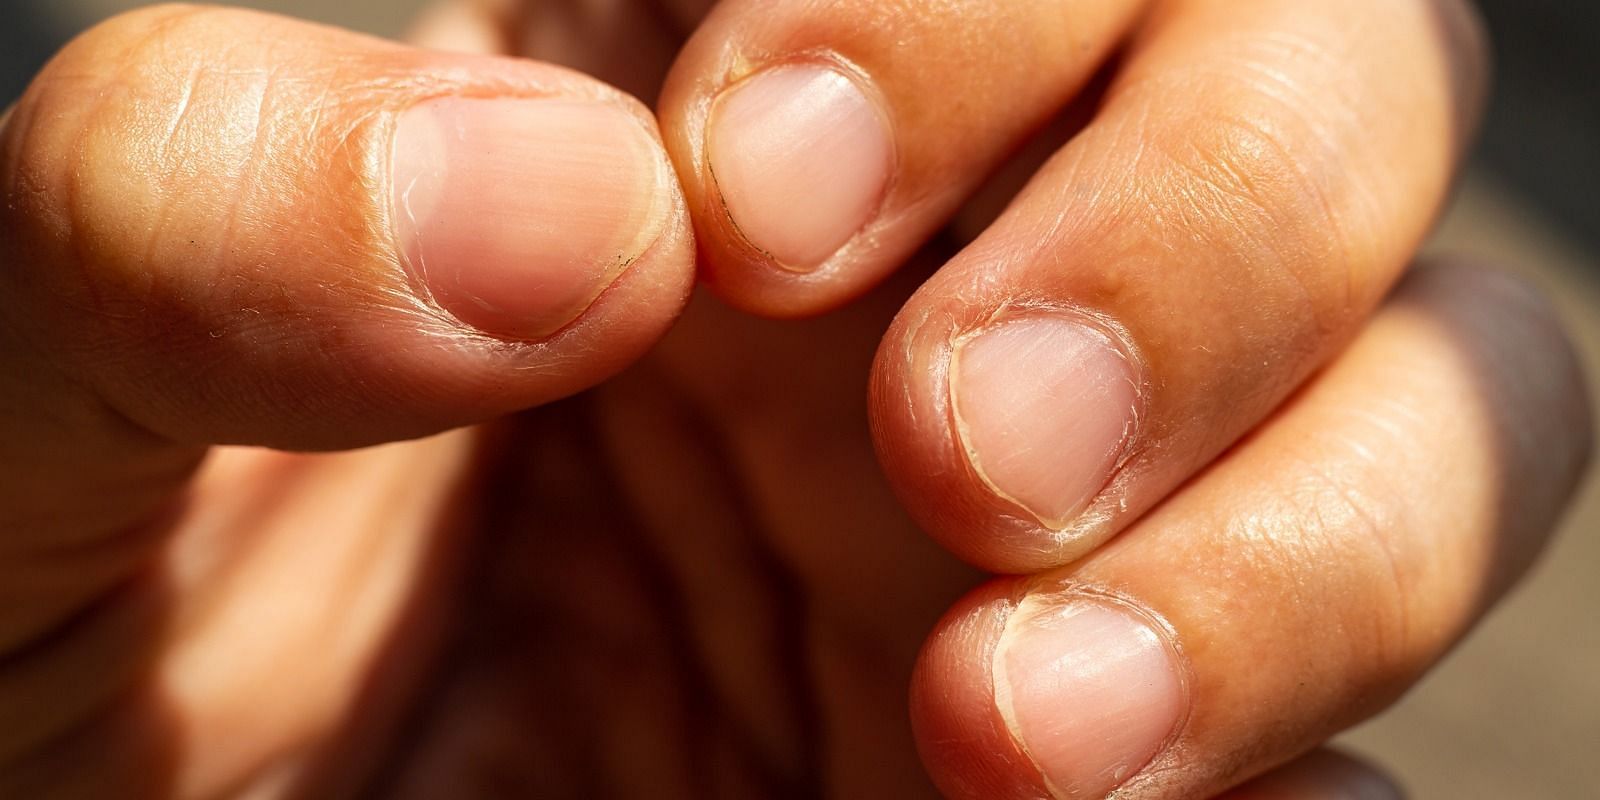 There are several health issues behind discolored nails (Image via Instagram/hey_miss_medico)